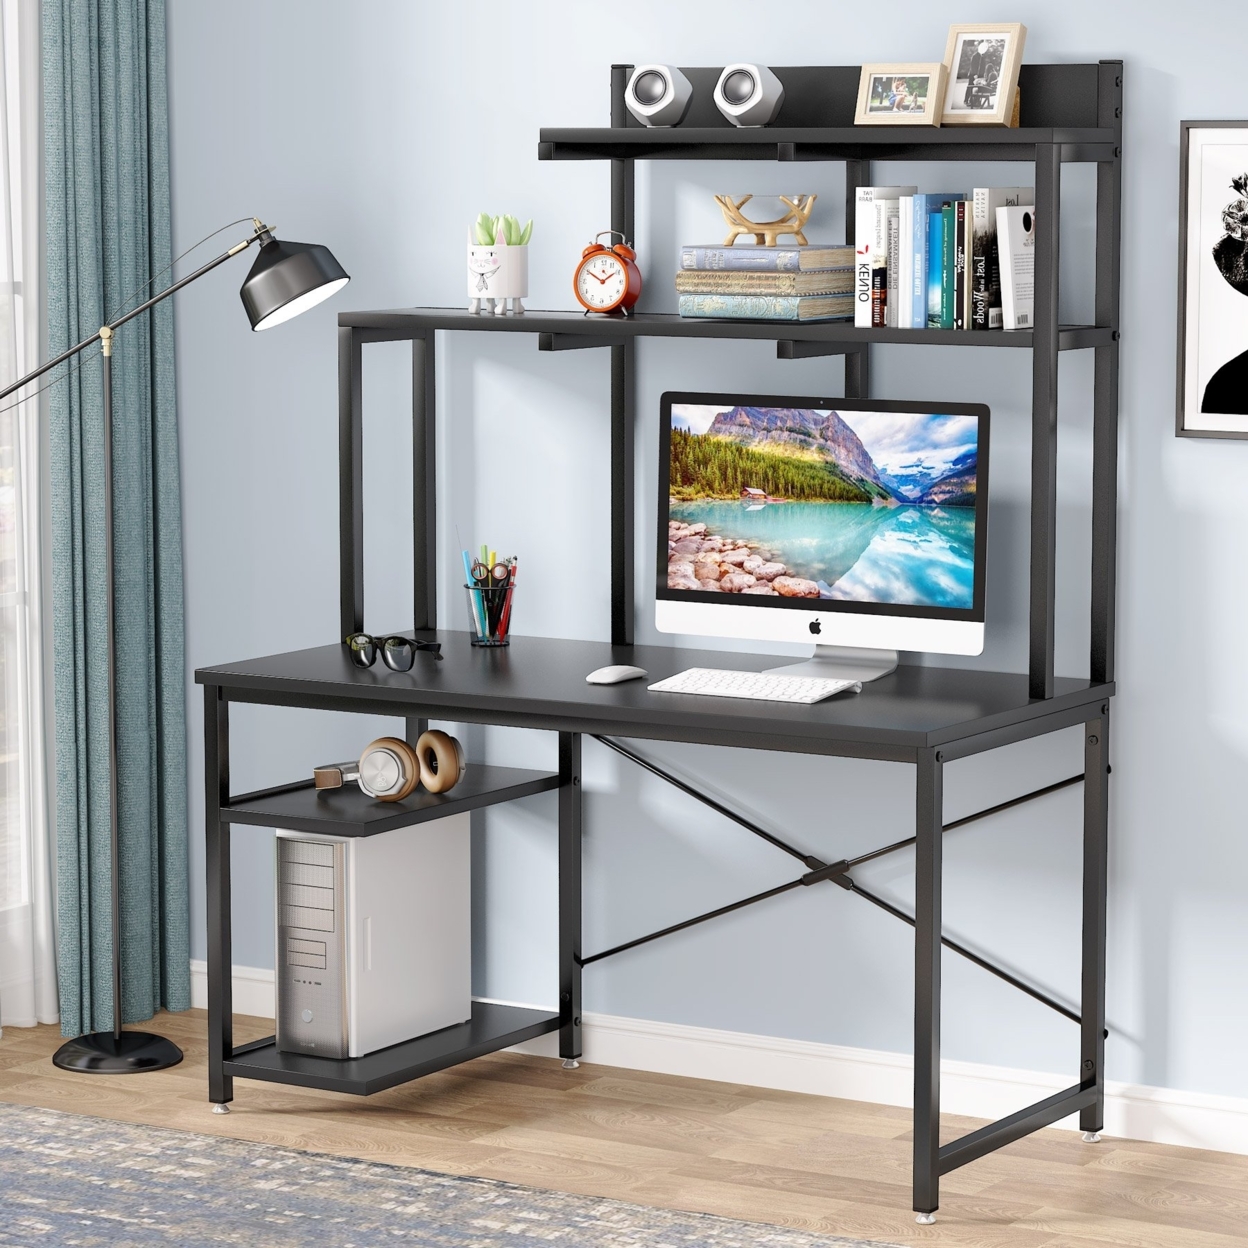 Tribesigns Computer Desk With Shelves And Hutch, 47 Inch Home Office Desk With Storage Bookshelf CPU Stand - Black